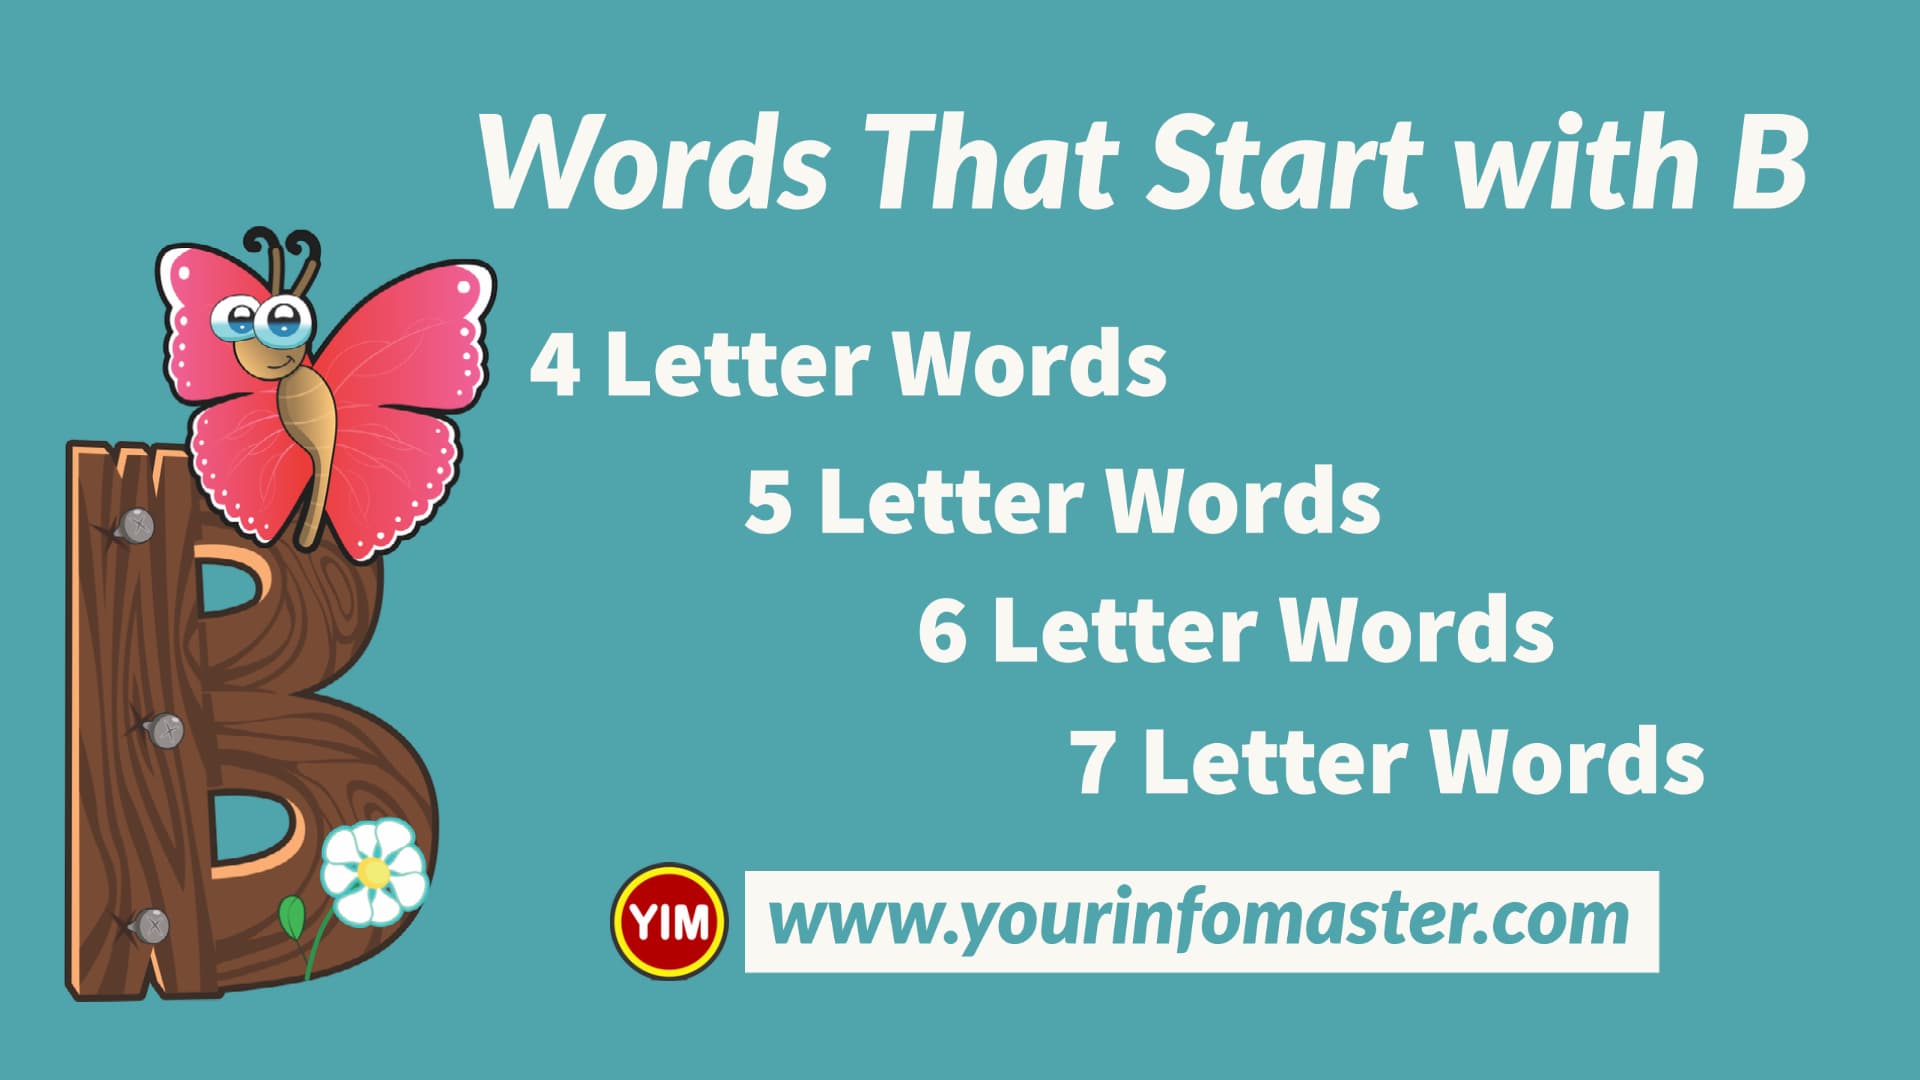 B start with things that Words that